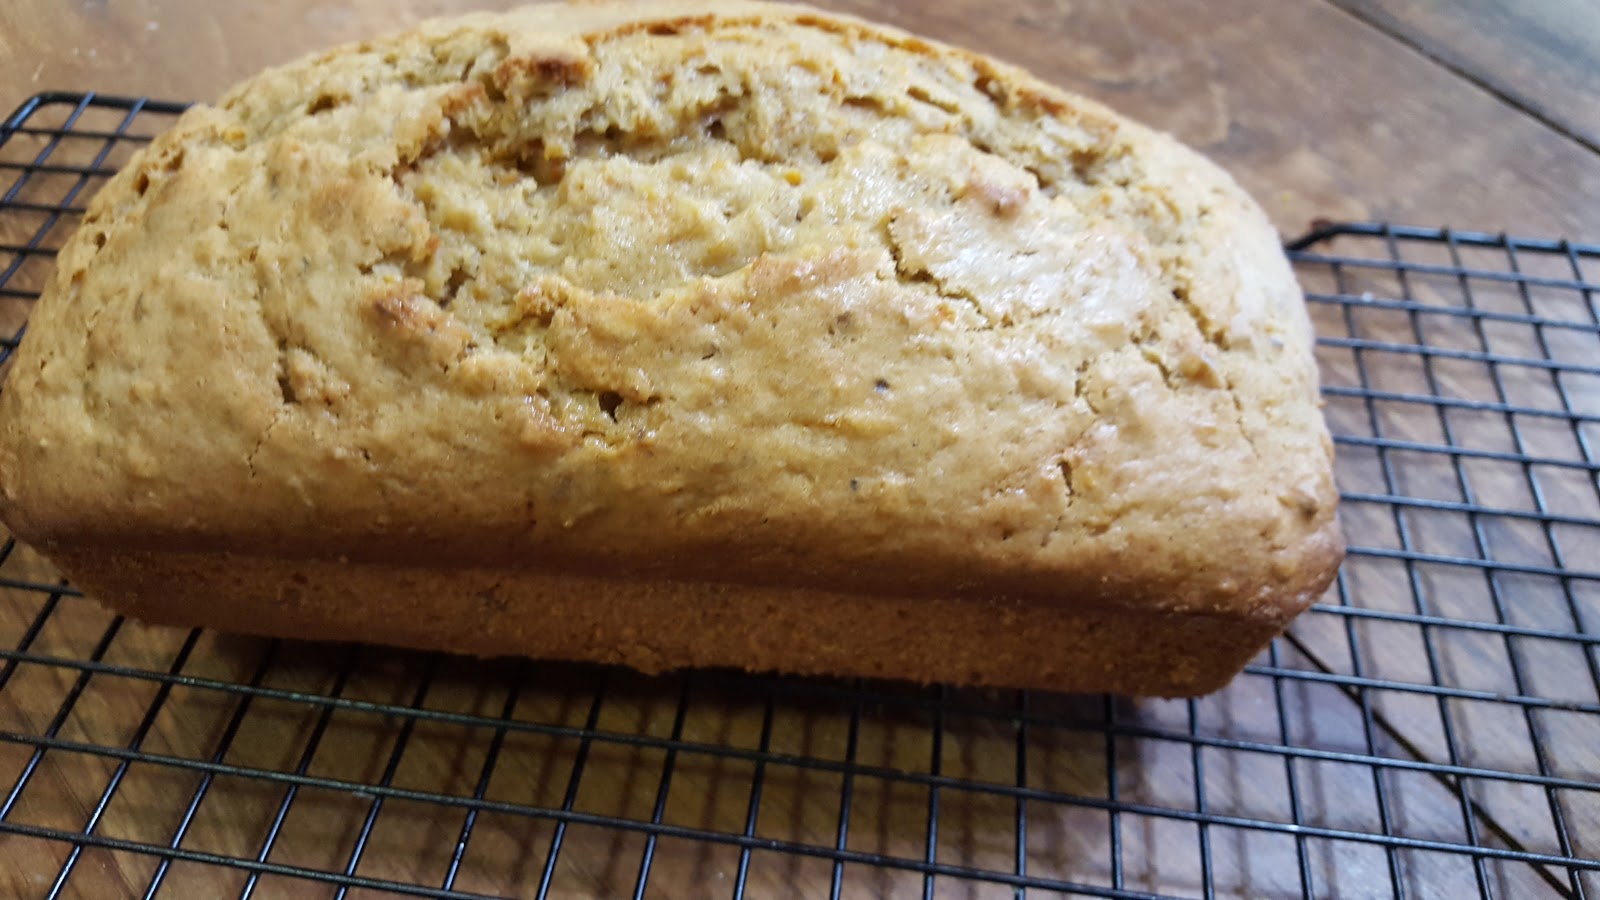 My Patchwork Quilt: GINGER-CARROT-NUT BREAD